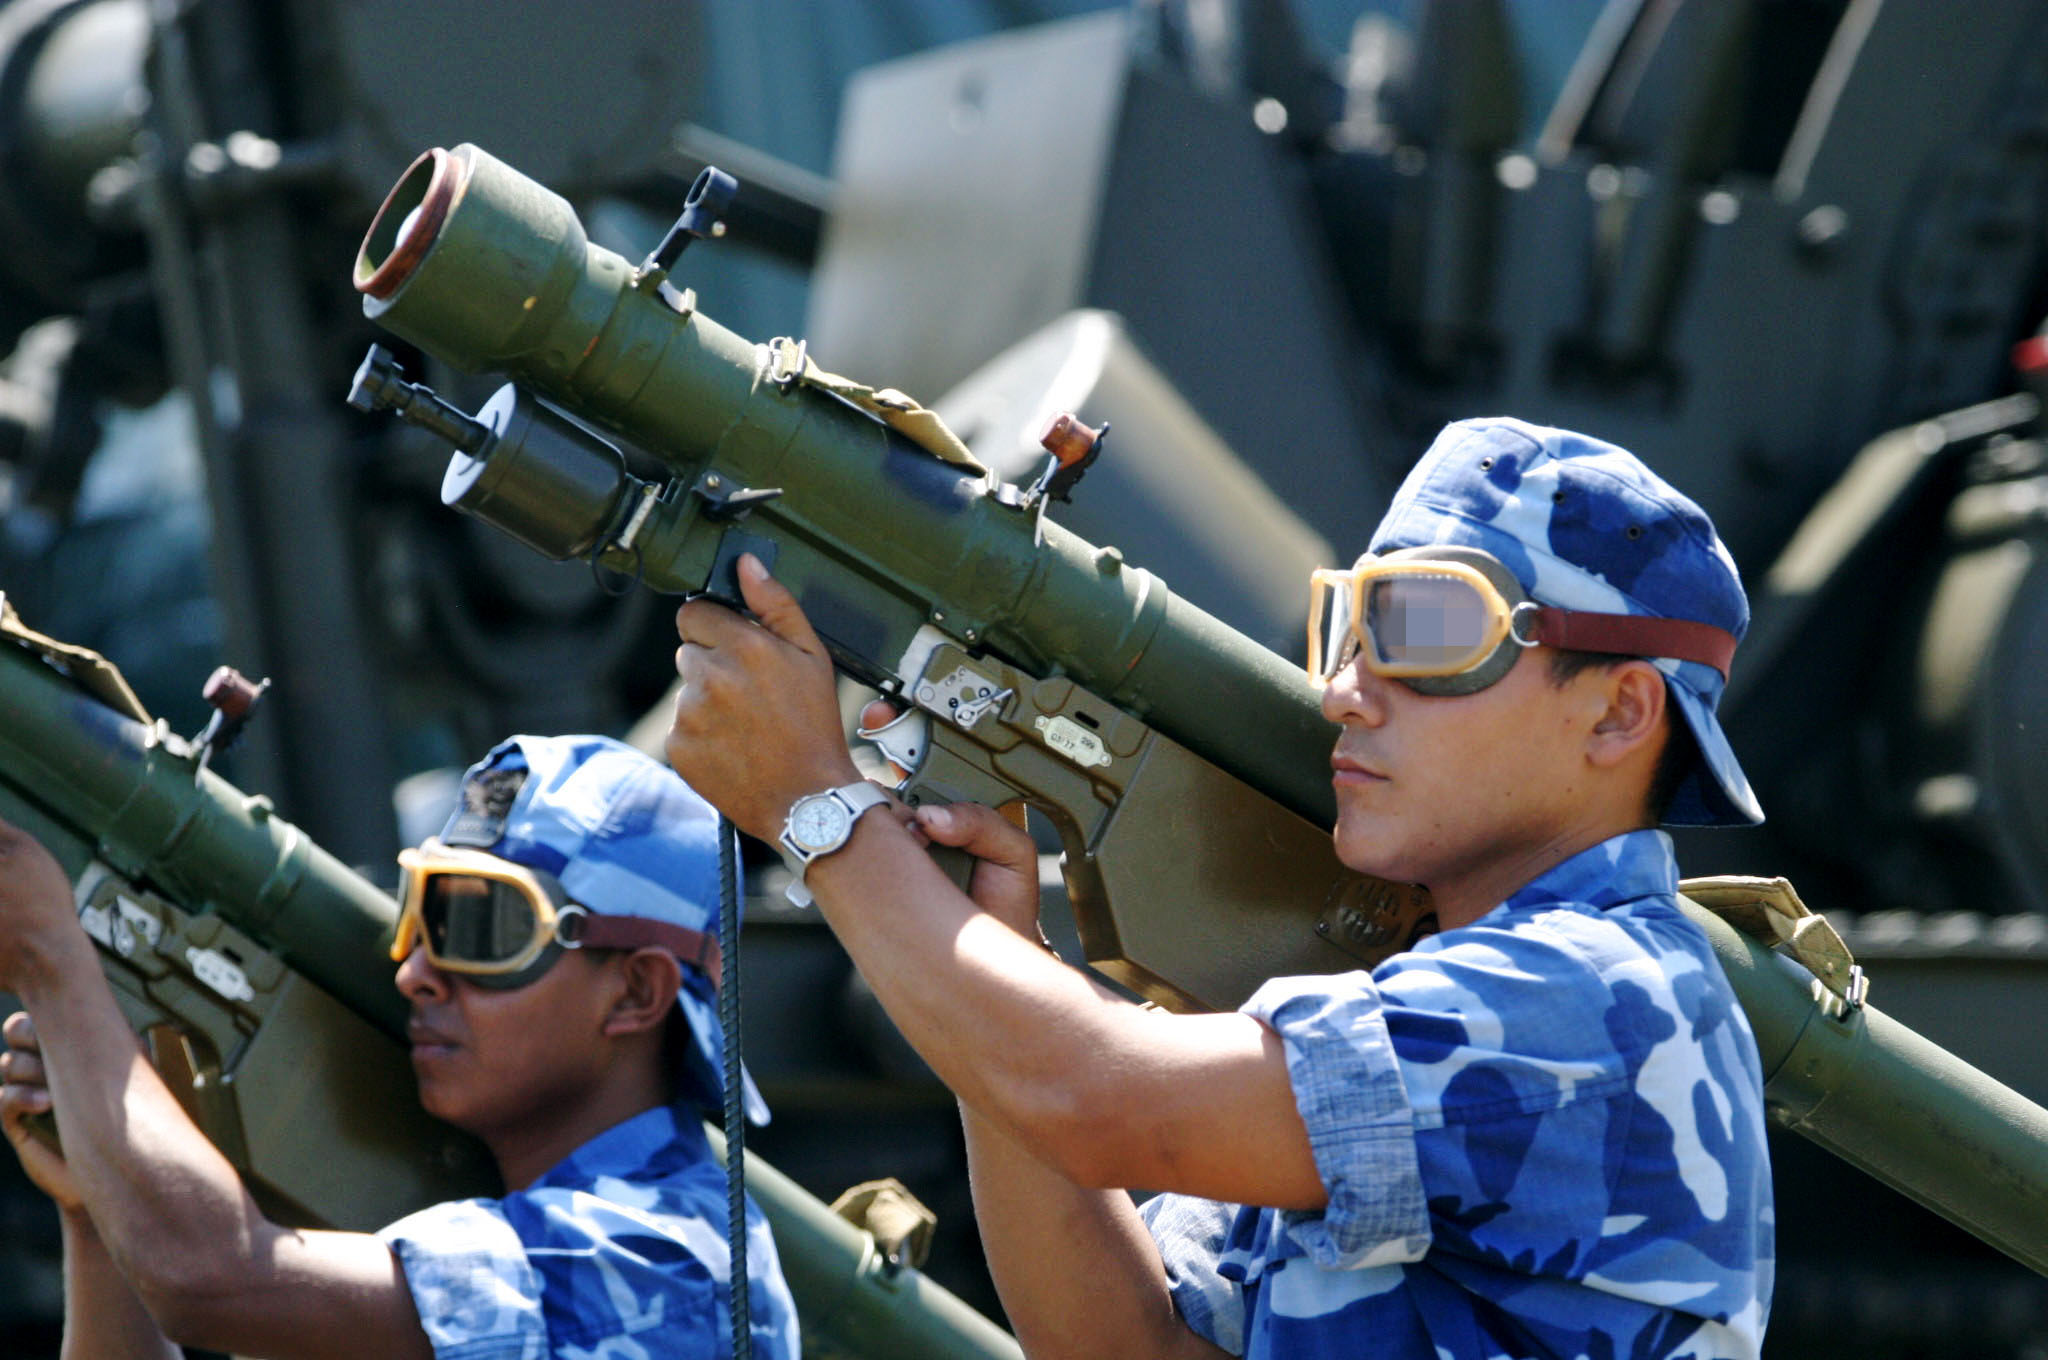 PHOTO: Nicaraguan soldiers carry SA-7 anti-aircraft missiles during a parade in Managua in 2003.